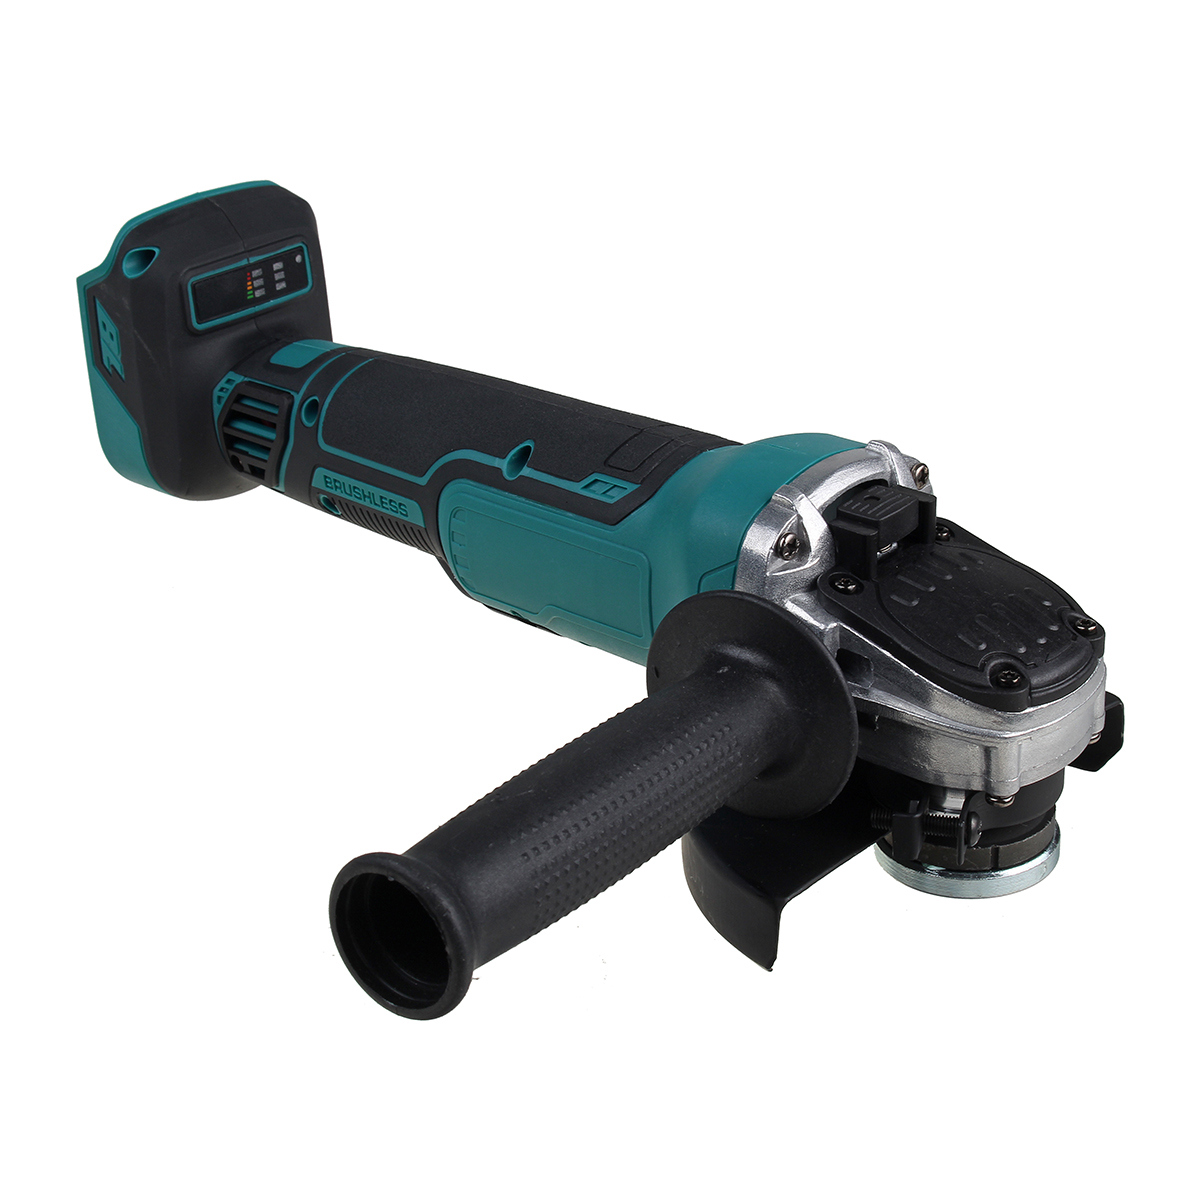 125mm-800W-Cordless-Brushless-Angle-Grinder-Cutting-Tool-Variable-Speed-Electric-Polisher-For-Makita-1825761-8